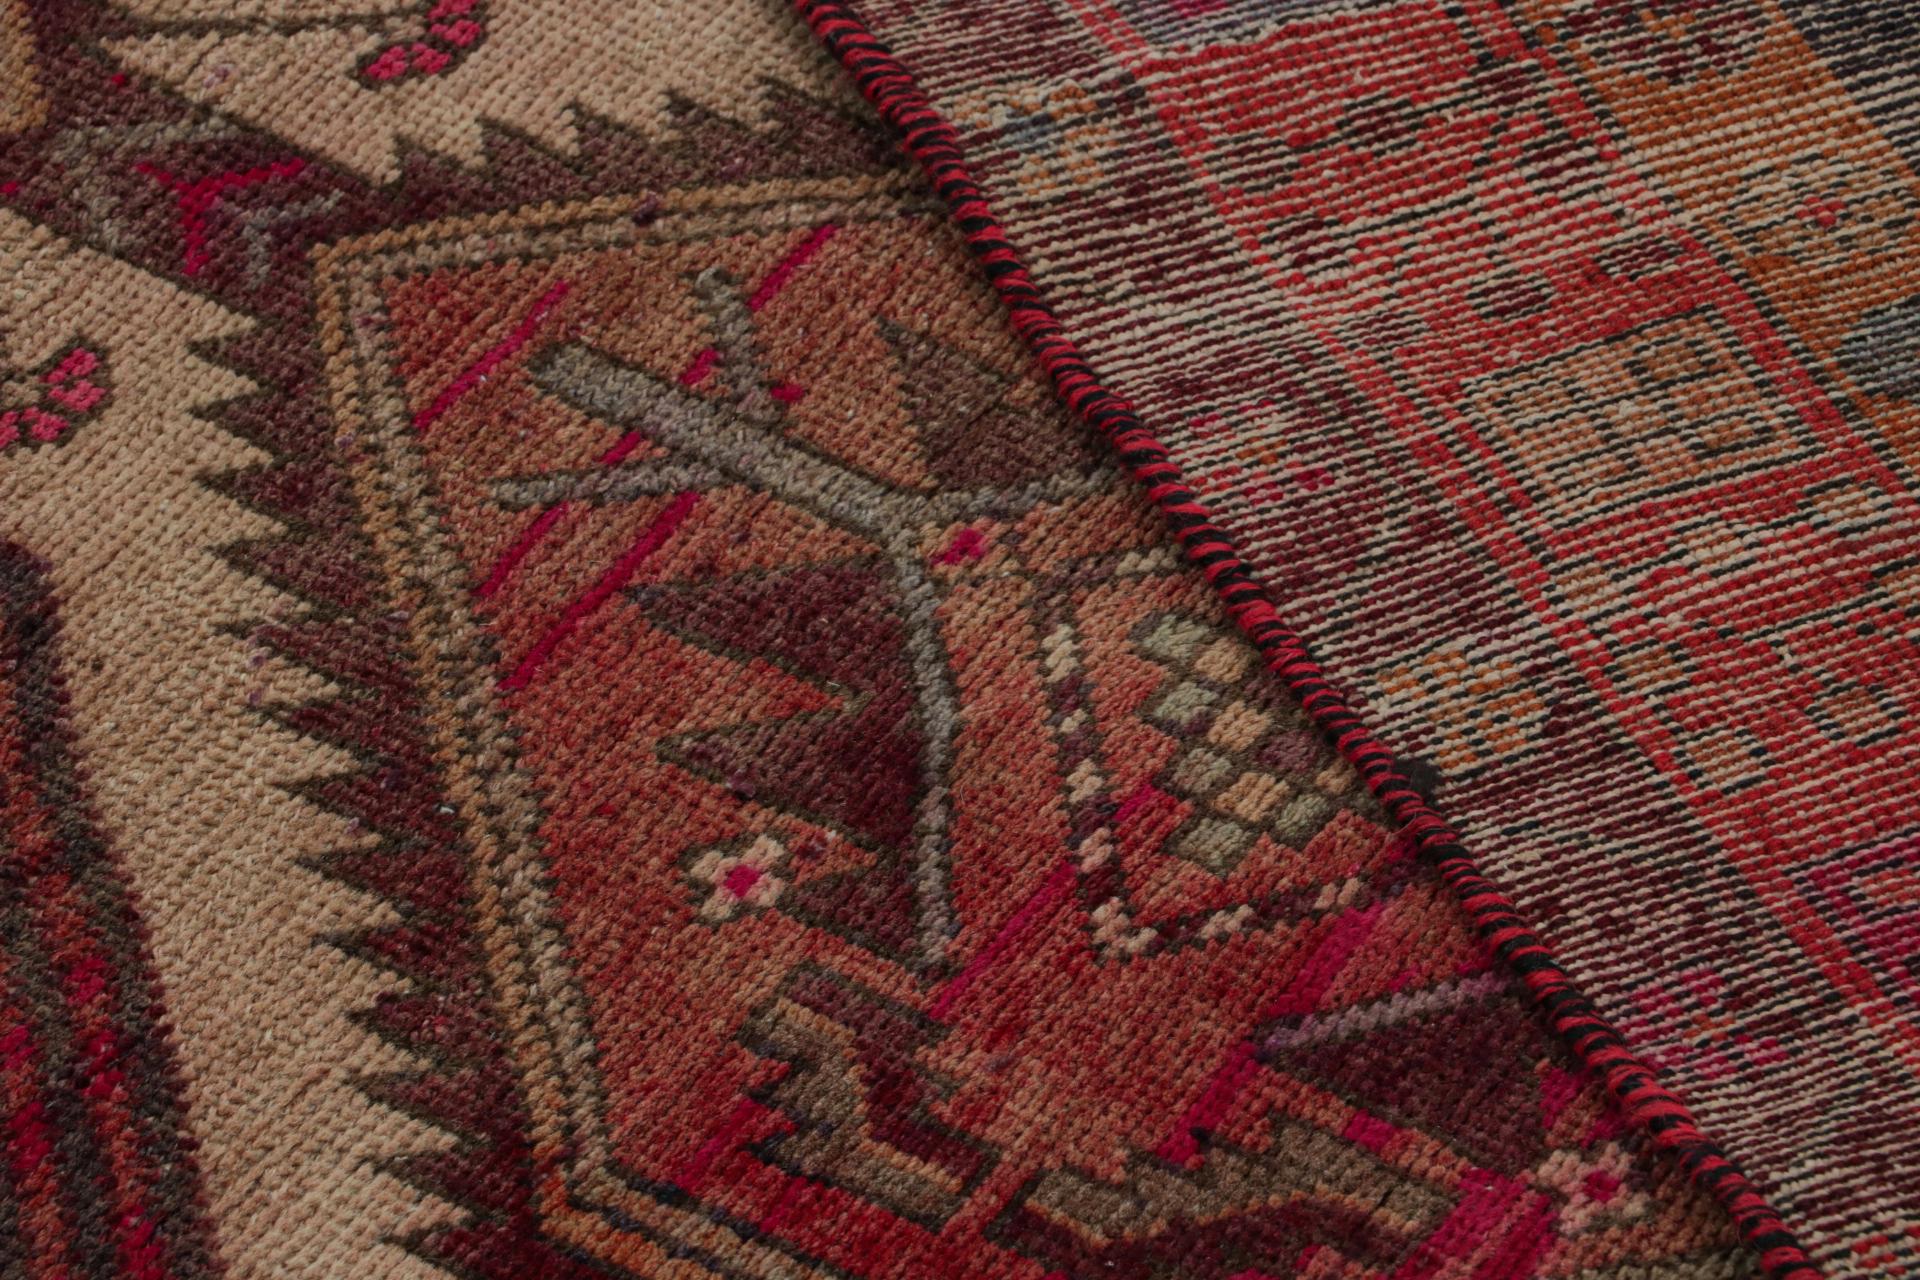 Vintage Persian runner with Red, Beige-Brown Patterns by Rug & Kilim For Sale 1